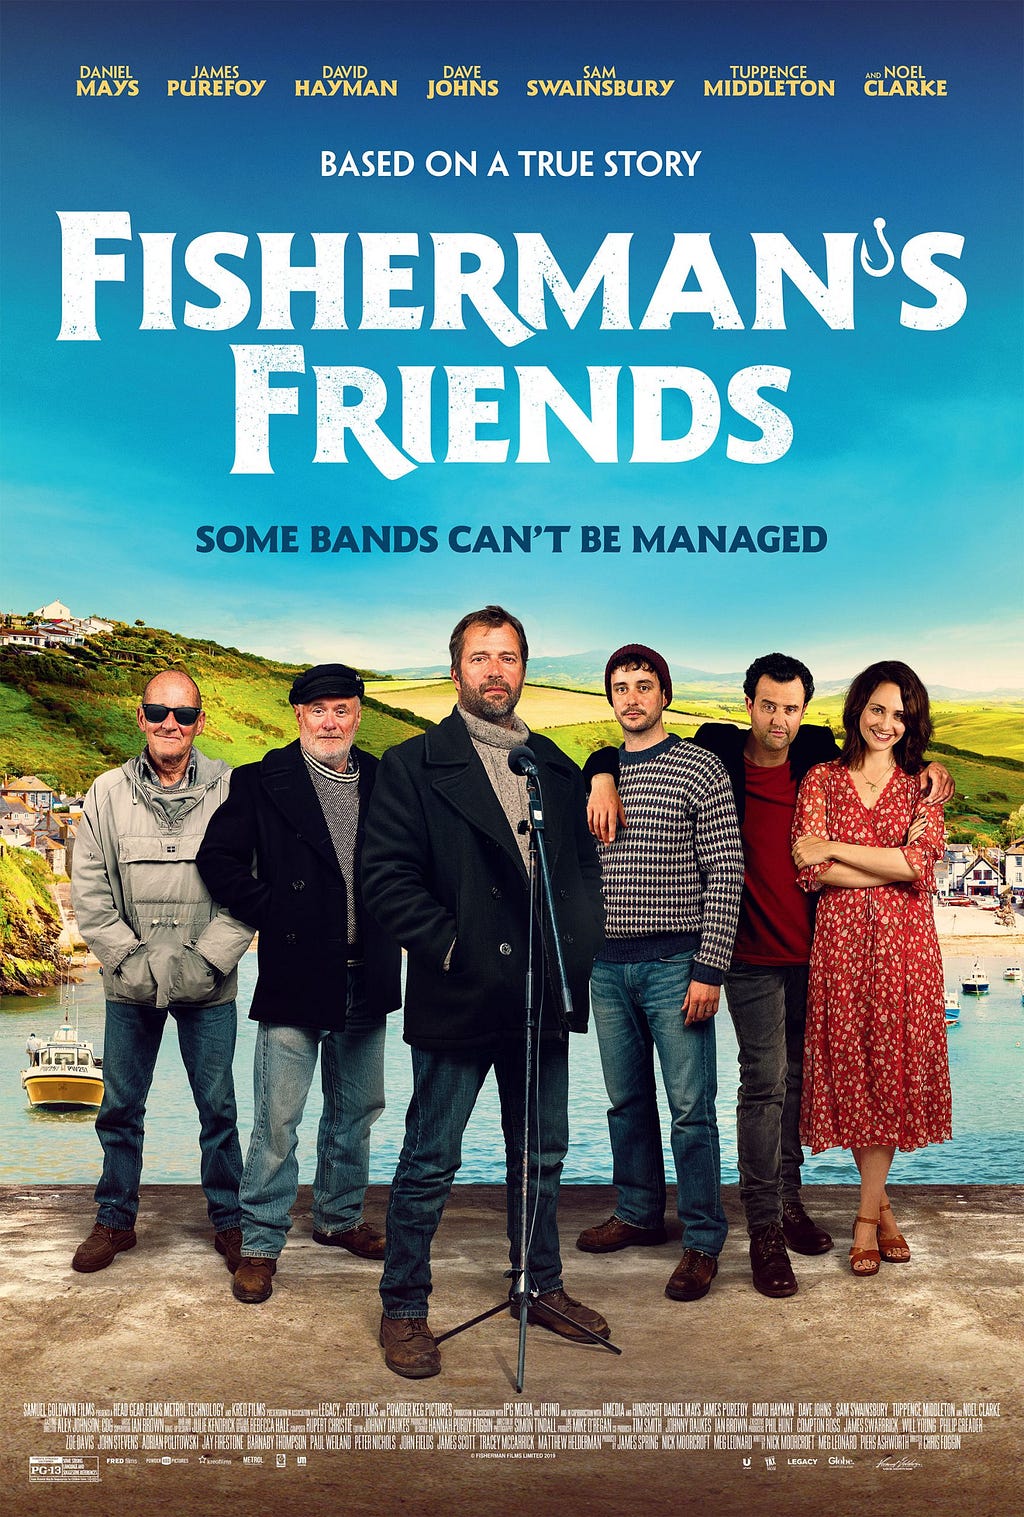 Chris Foggin Makes Film Magic with a Little Help from FISHERMAN'S FRIENDS